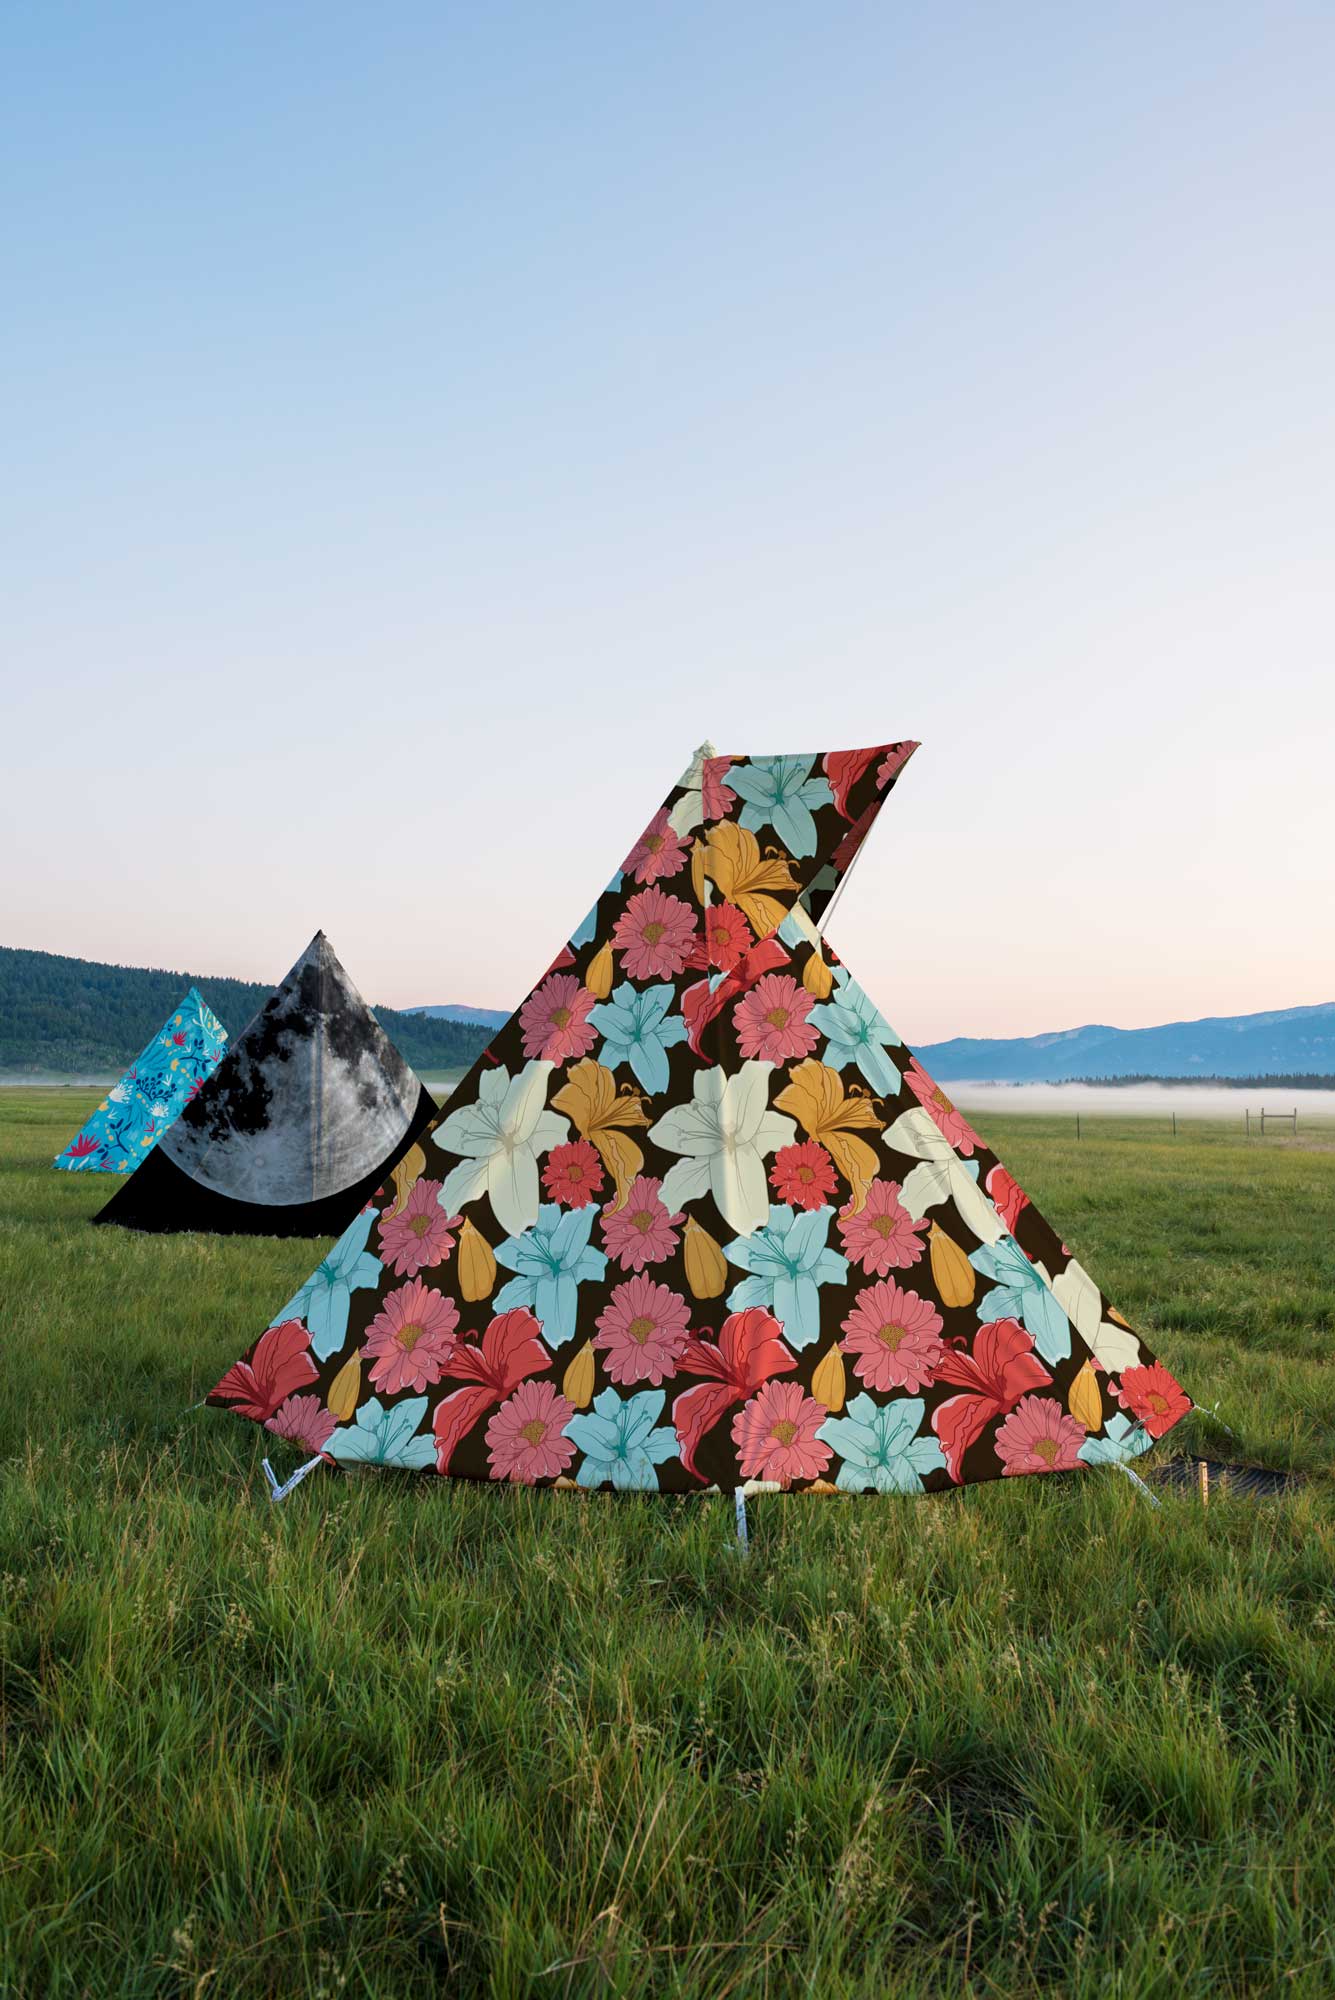 Printed festival tents